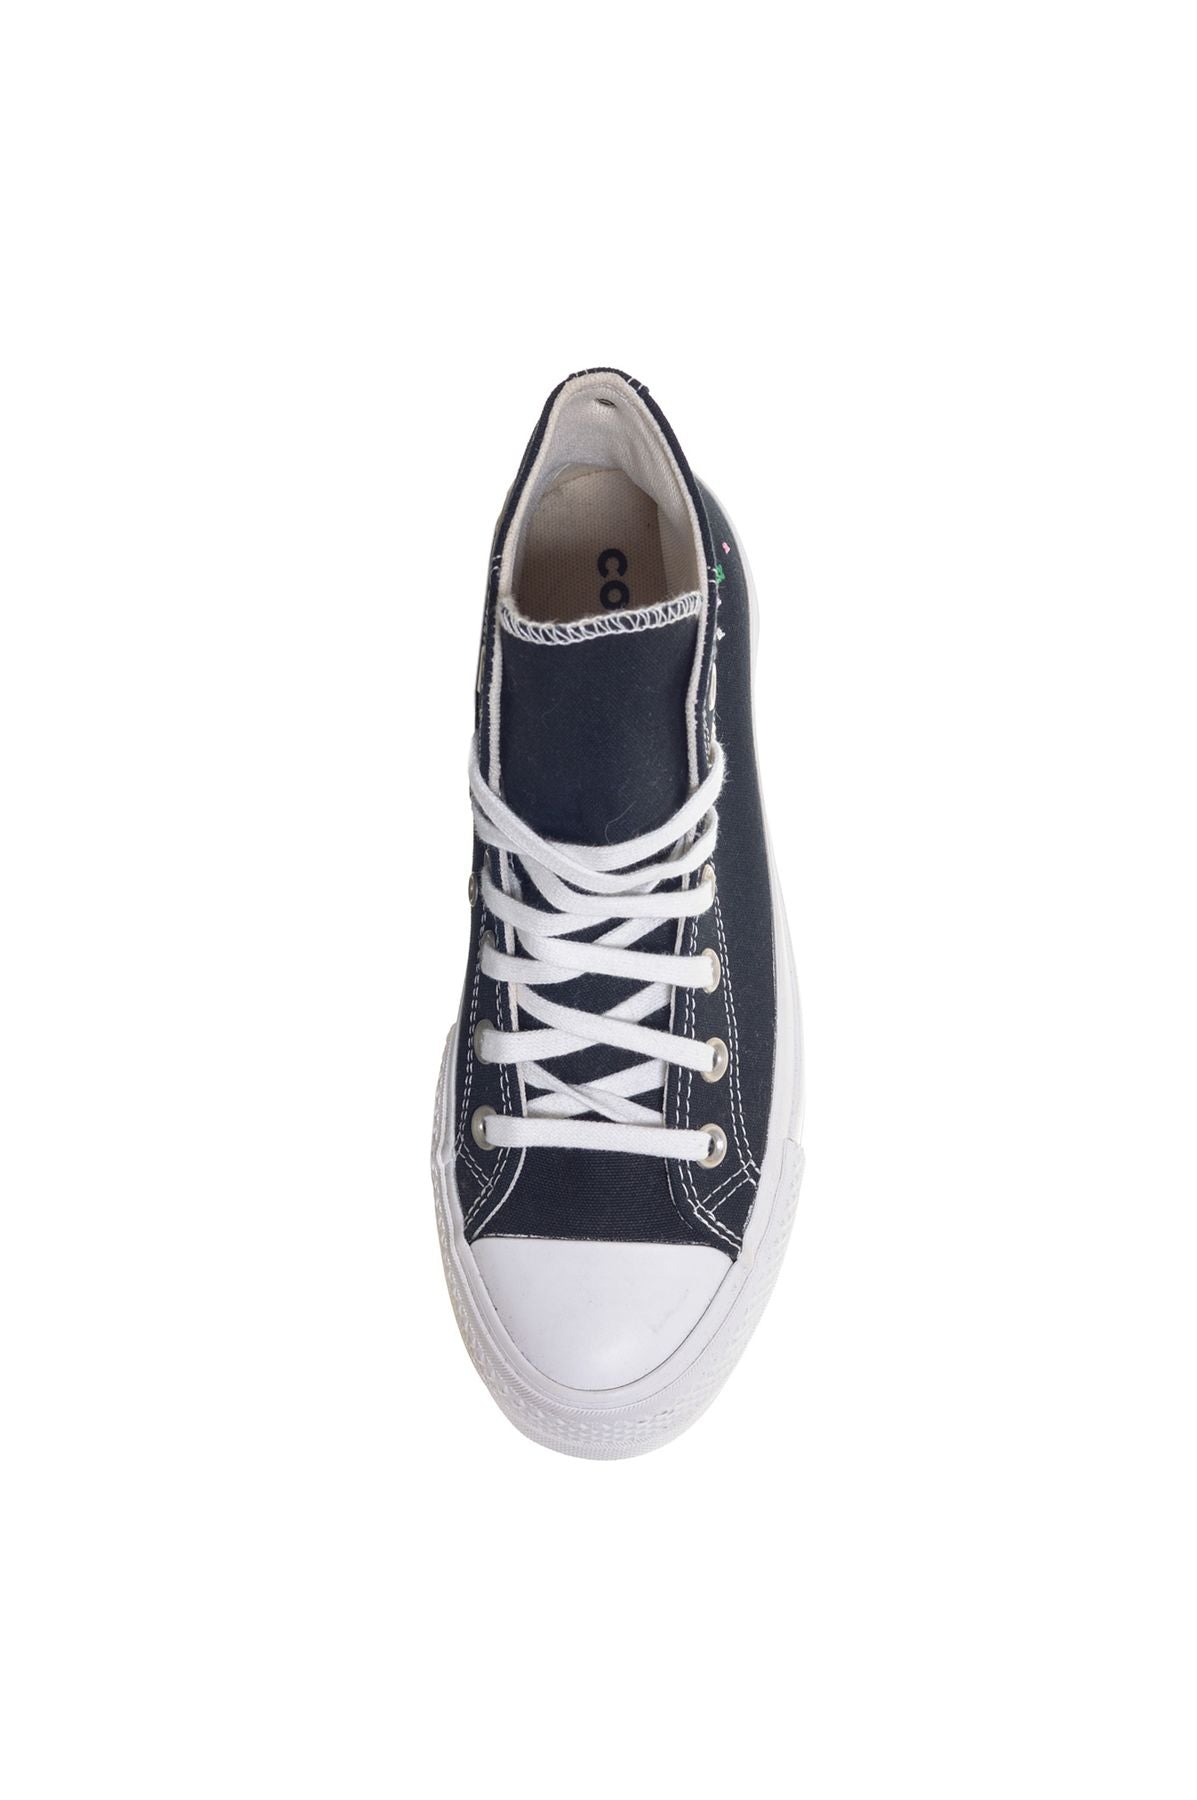 CONVERSE Spring/Summer Sneakers a03739c